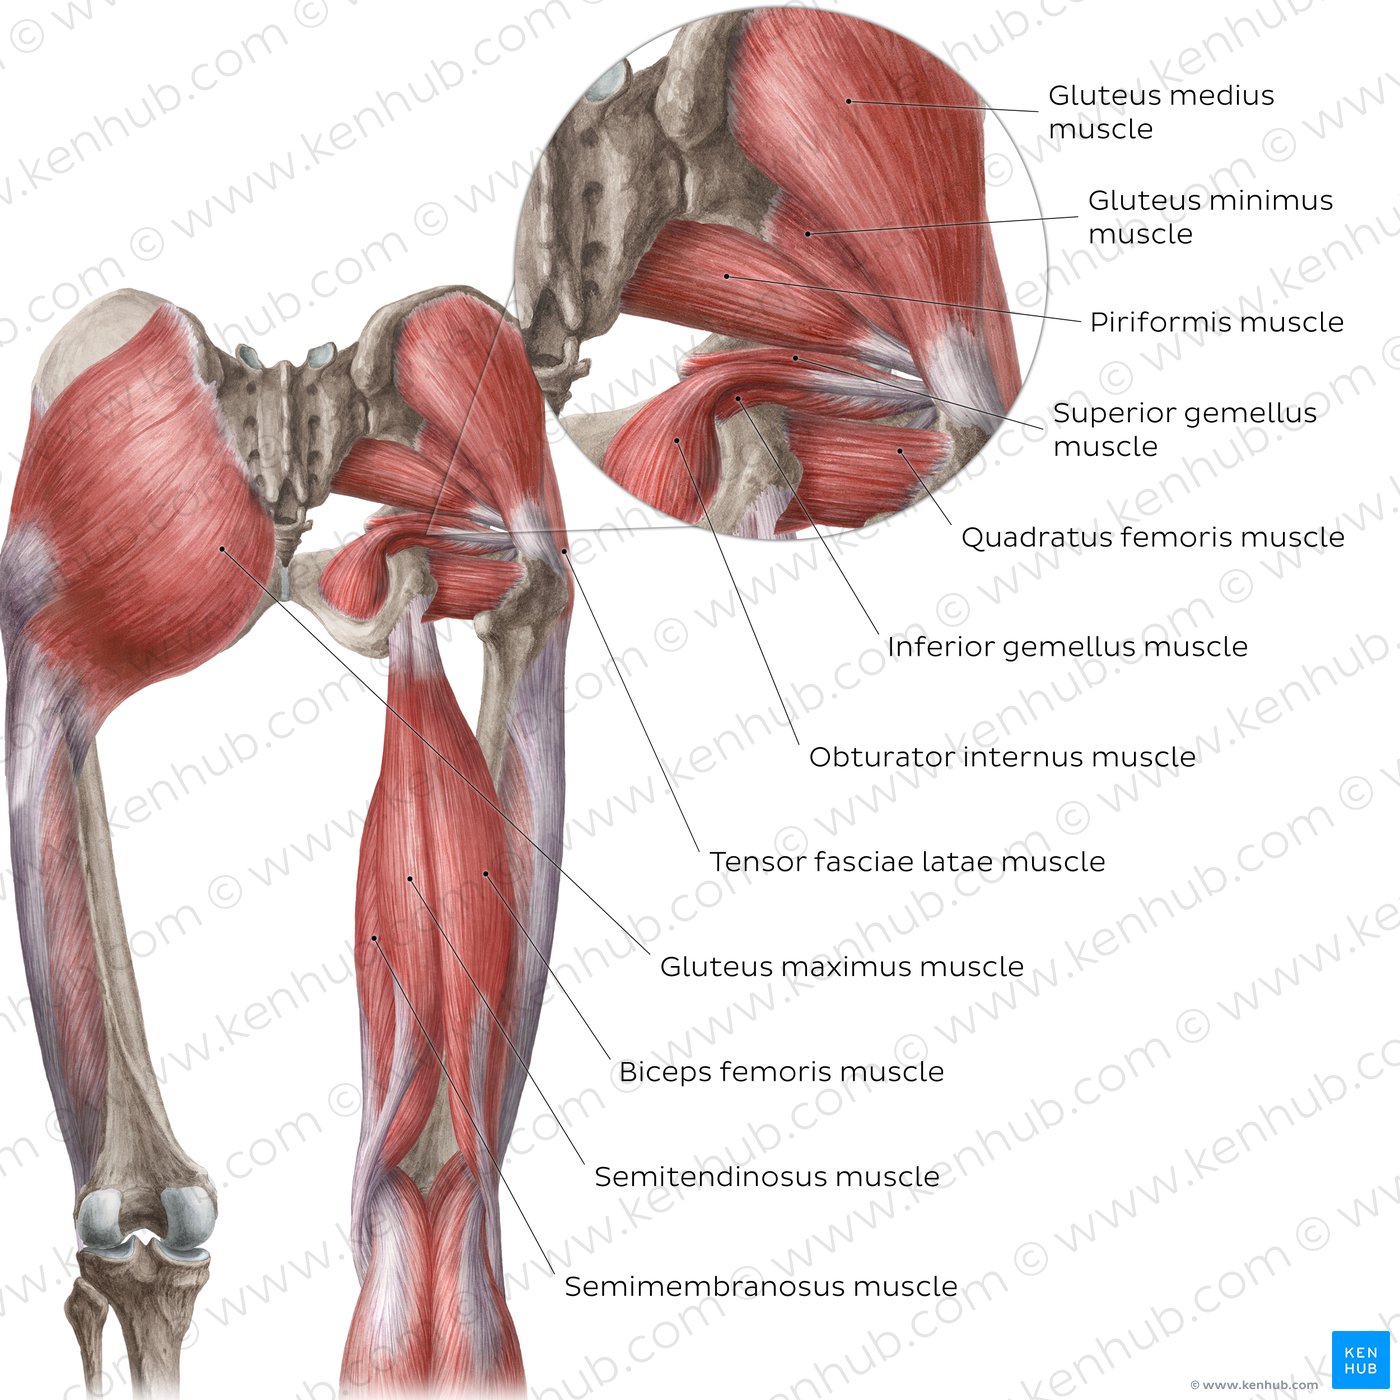 Muscles of the hip and thigh (Posterior view)